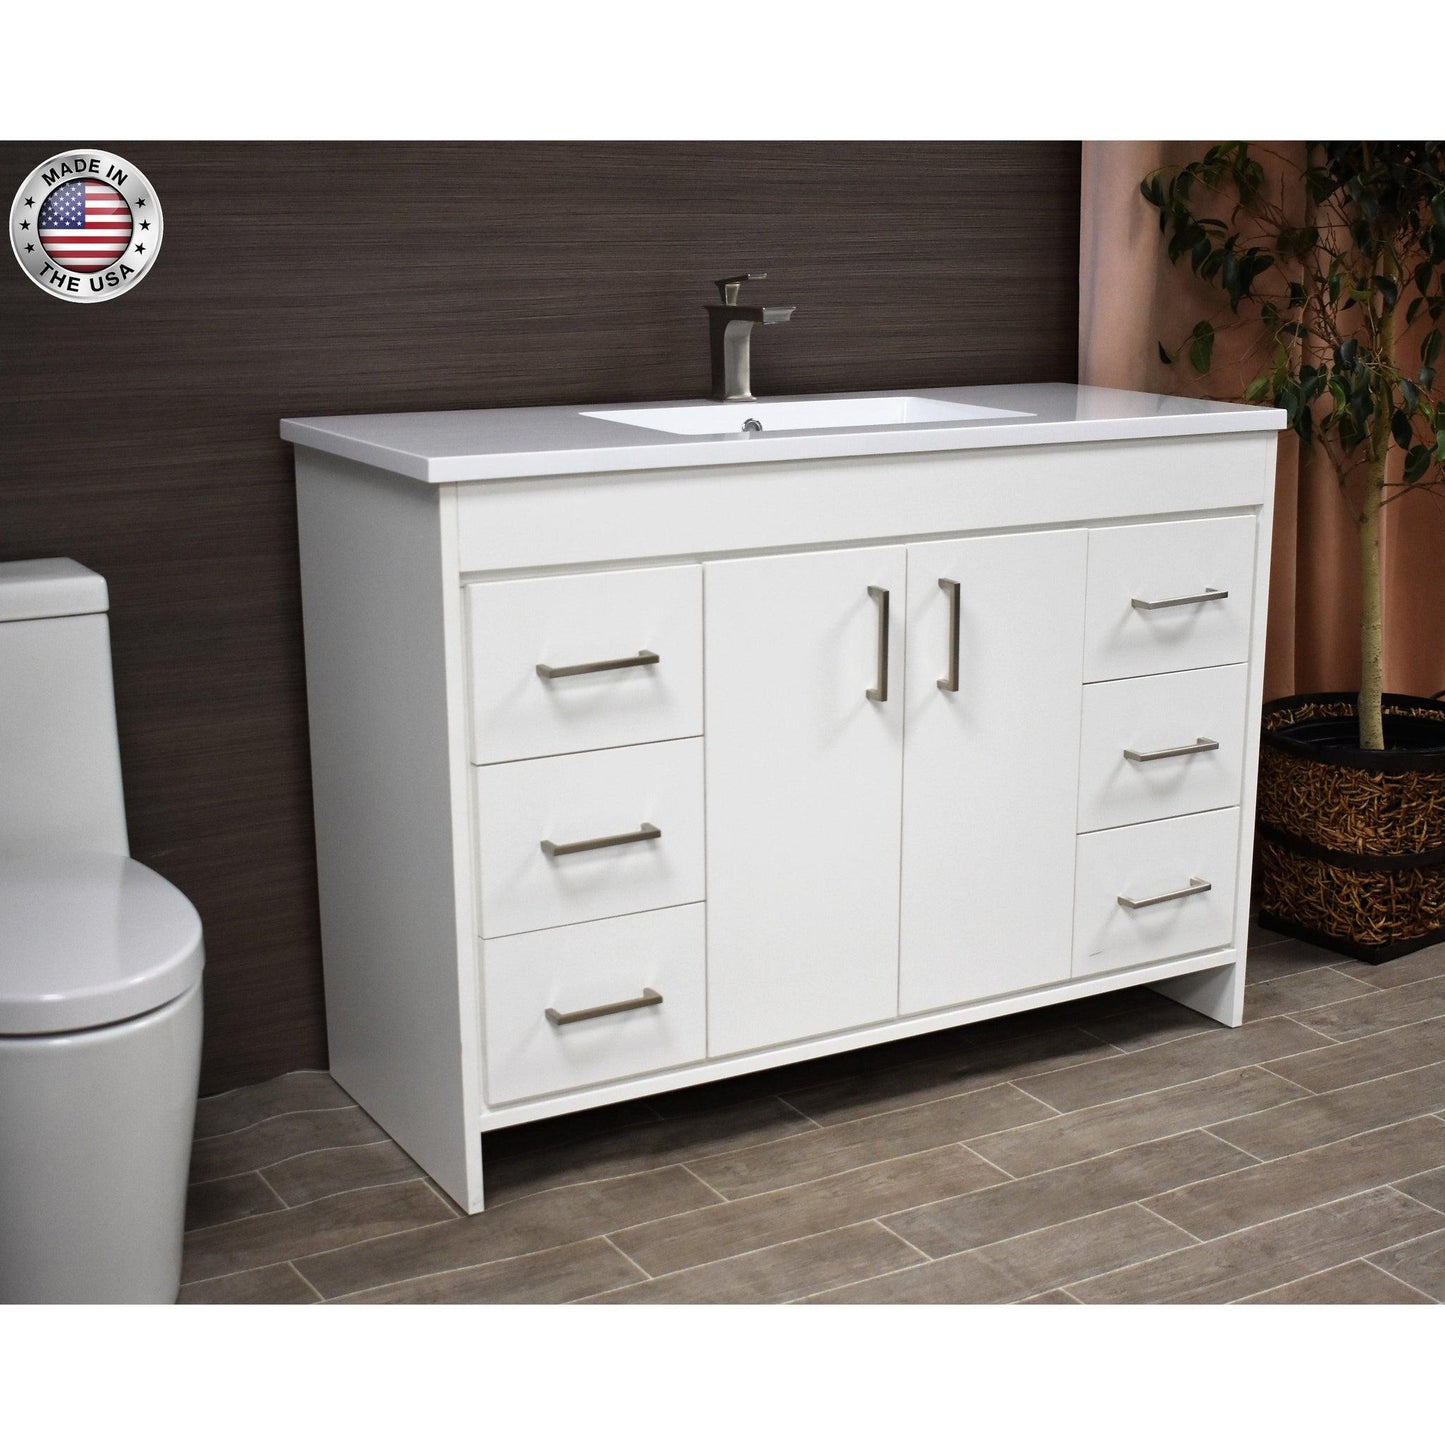 Volpa USA Rio 48" White Freestanding Modern Bathroom Vanity With Integrated Acrylic Top and Brushed Nickel Handles